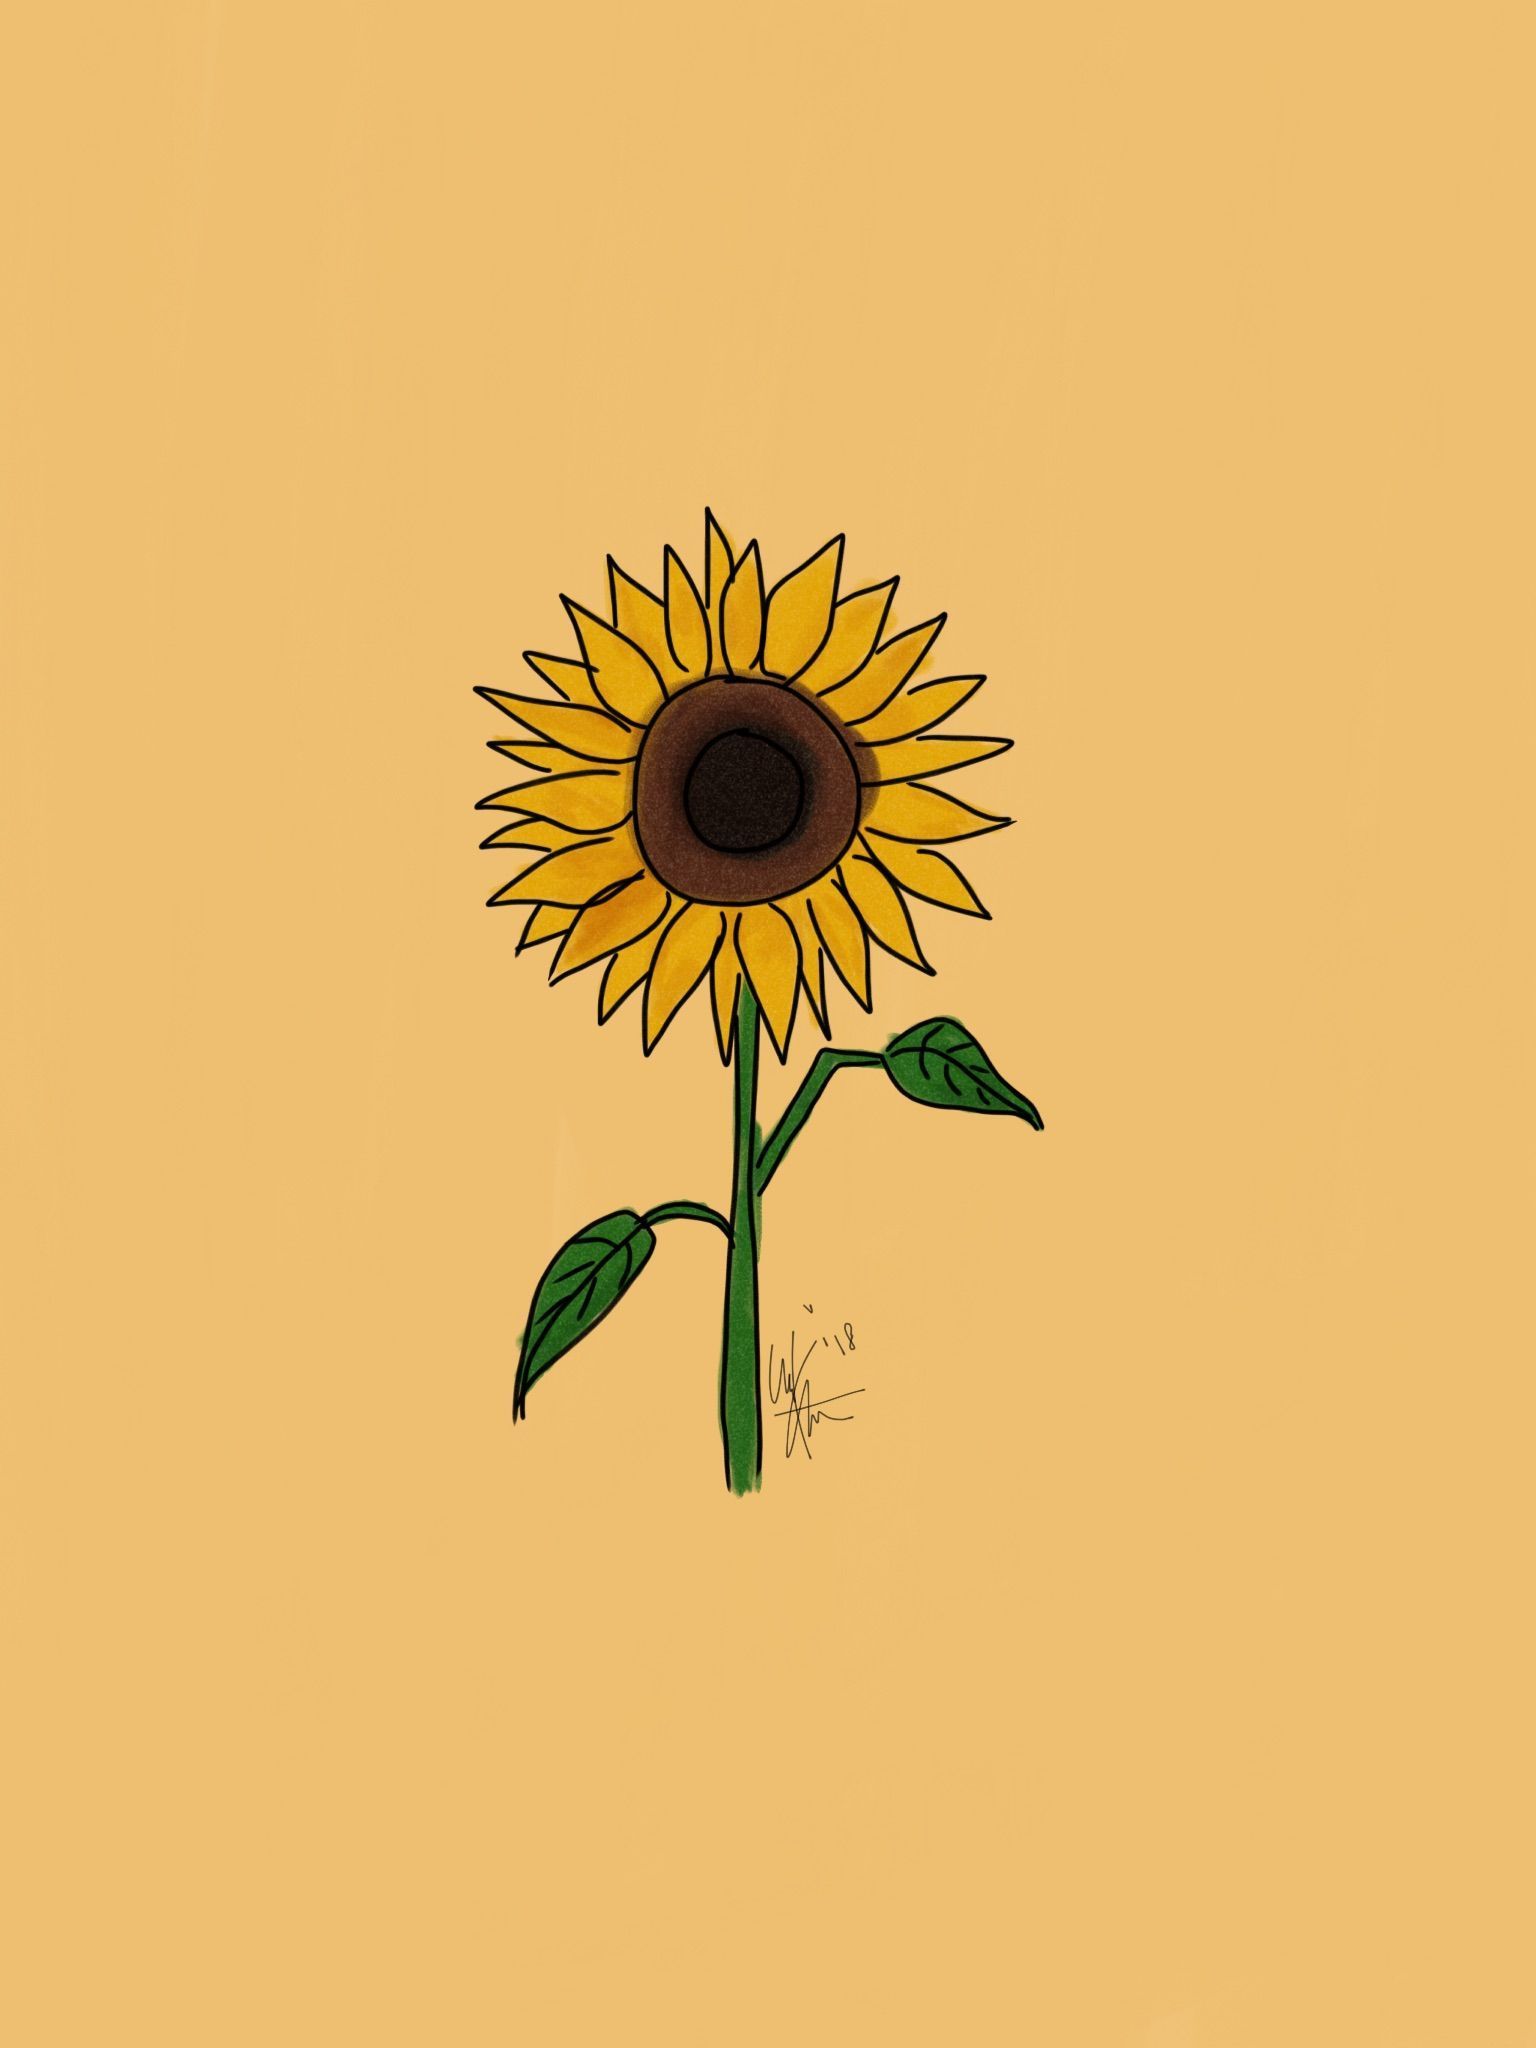 A yellow sunflower with a brown center on a yellow background - Profile picture, sunflower, yellow iphone